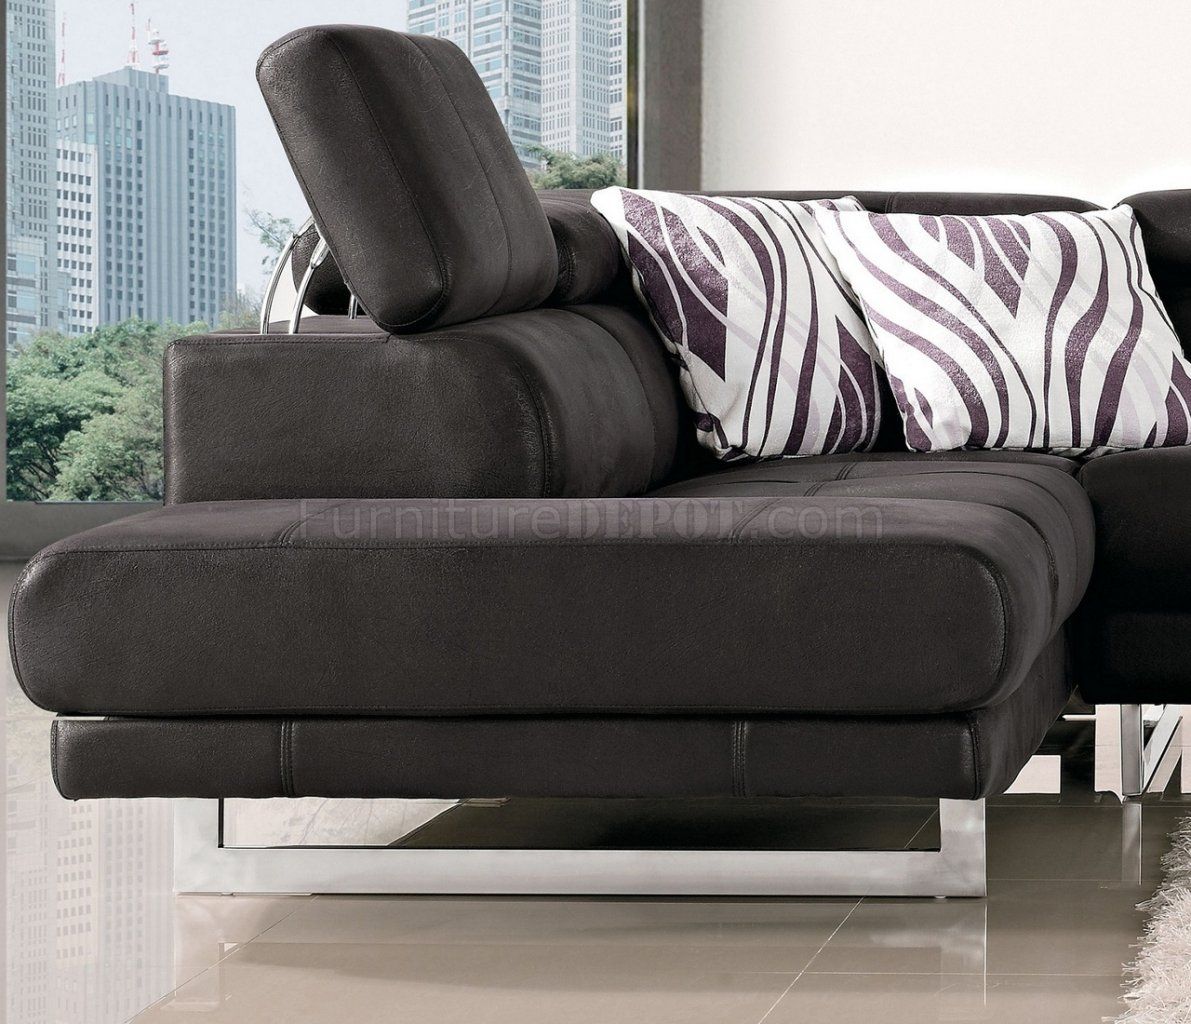 Black Fabric Modern Sectional Sofa W/Adjustable Headrest Inside Sectional Sofas (View 10 of 15)